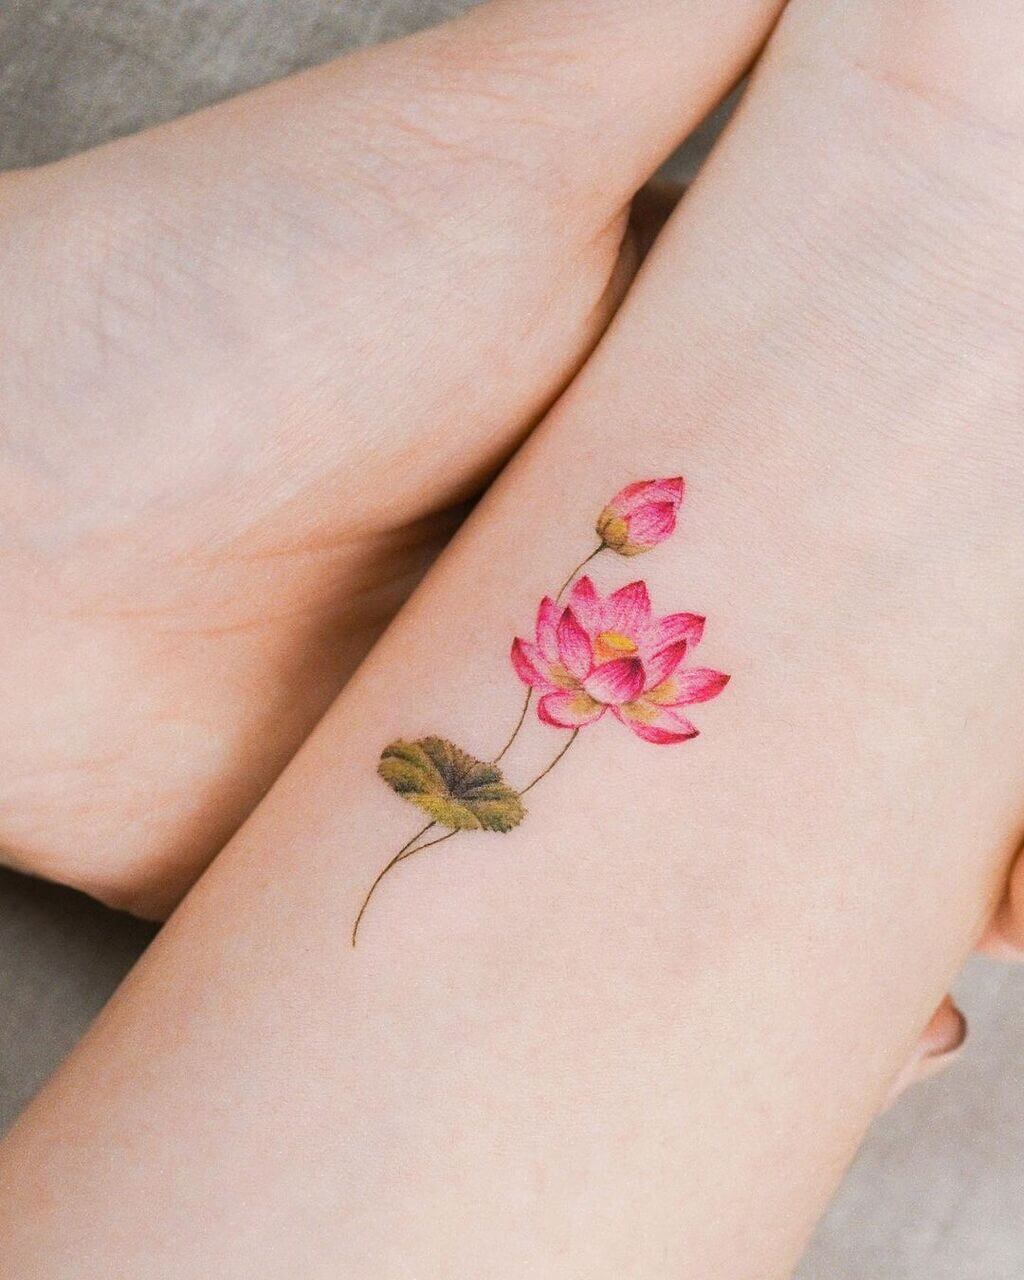 A woman' with small cherry blossom tattoo